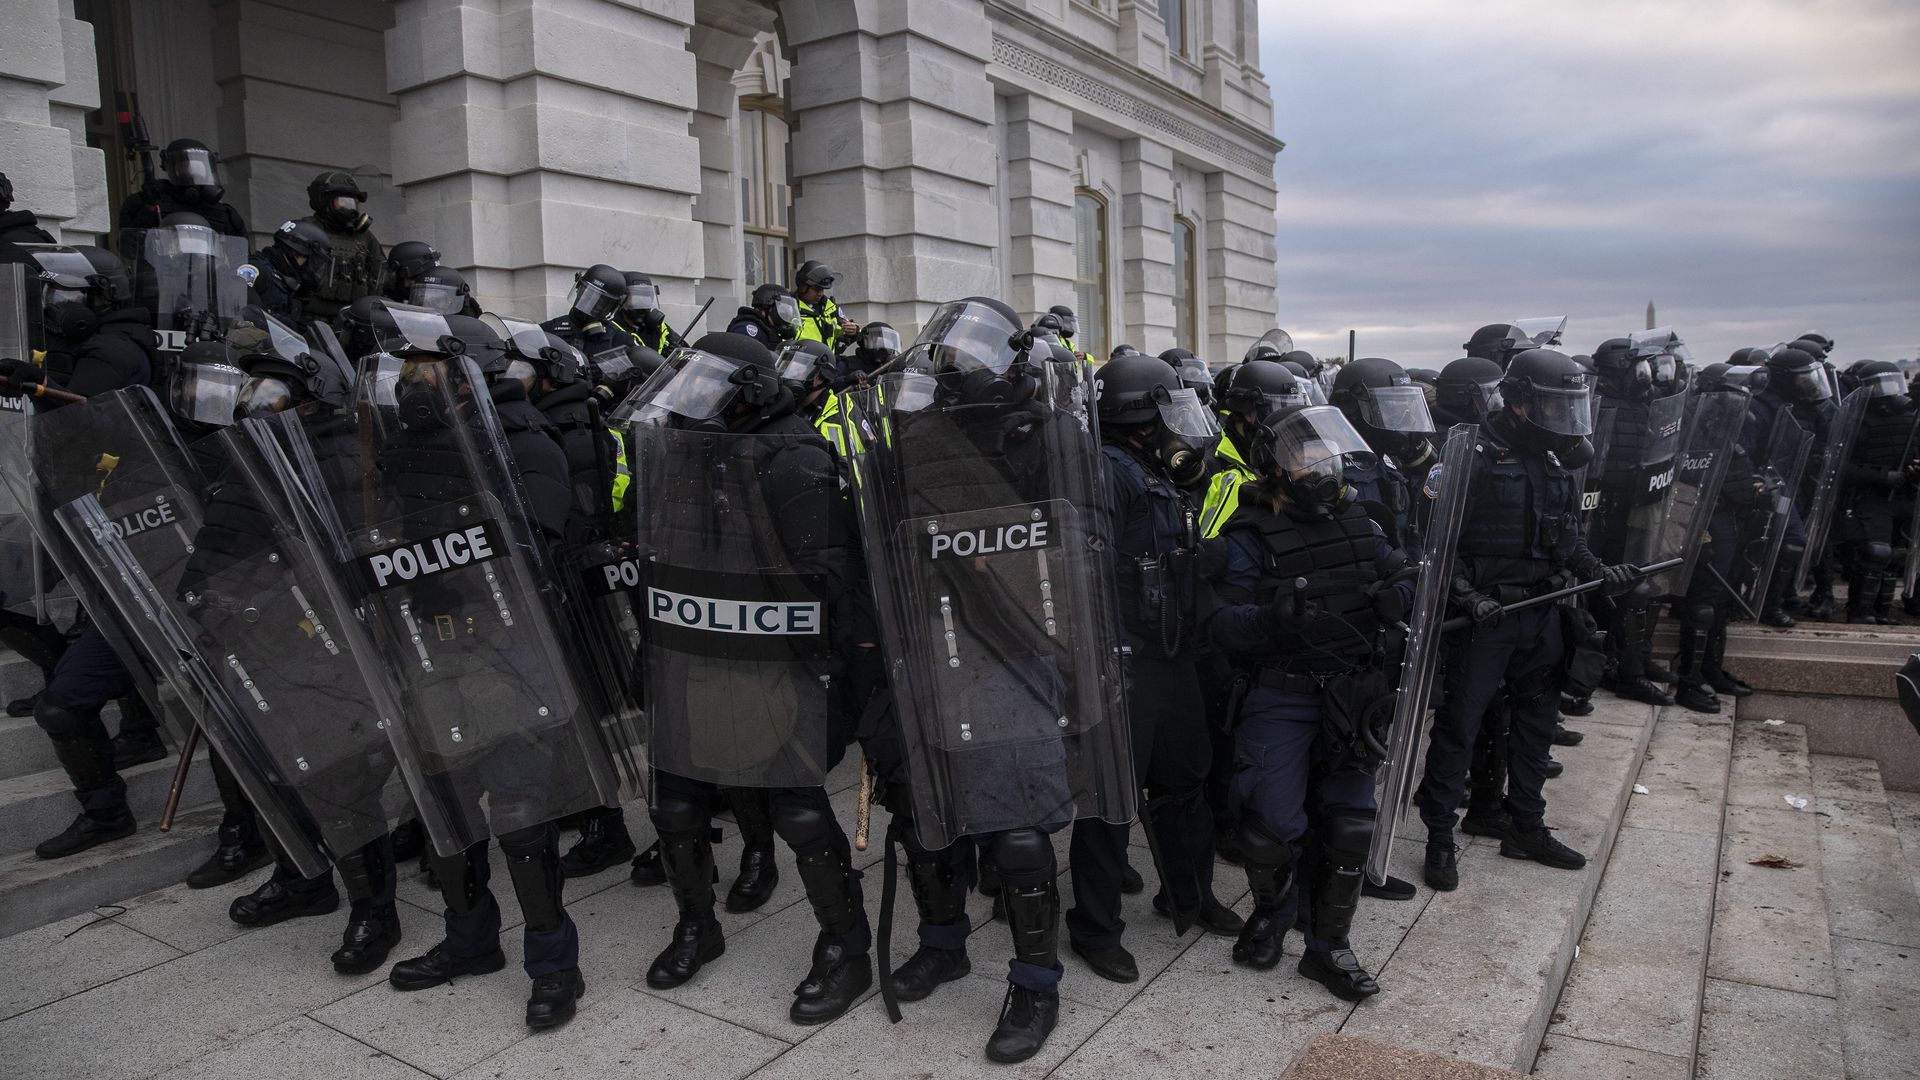 Police outside the Capitol in Washington, D.C., on Jan. 6, 2021.